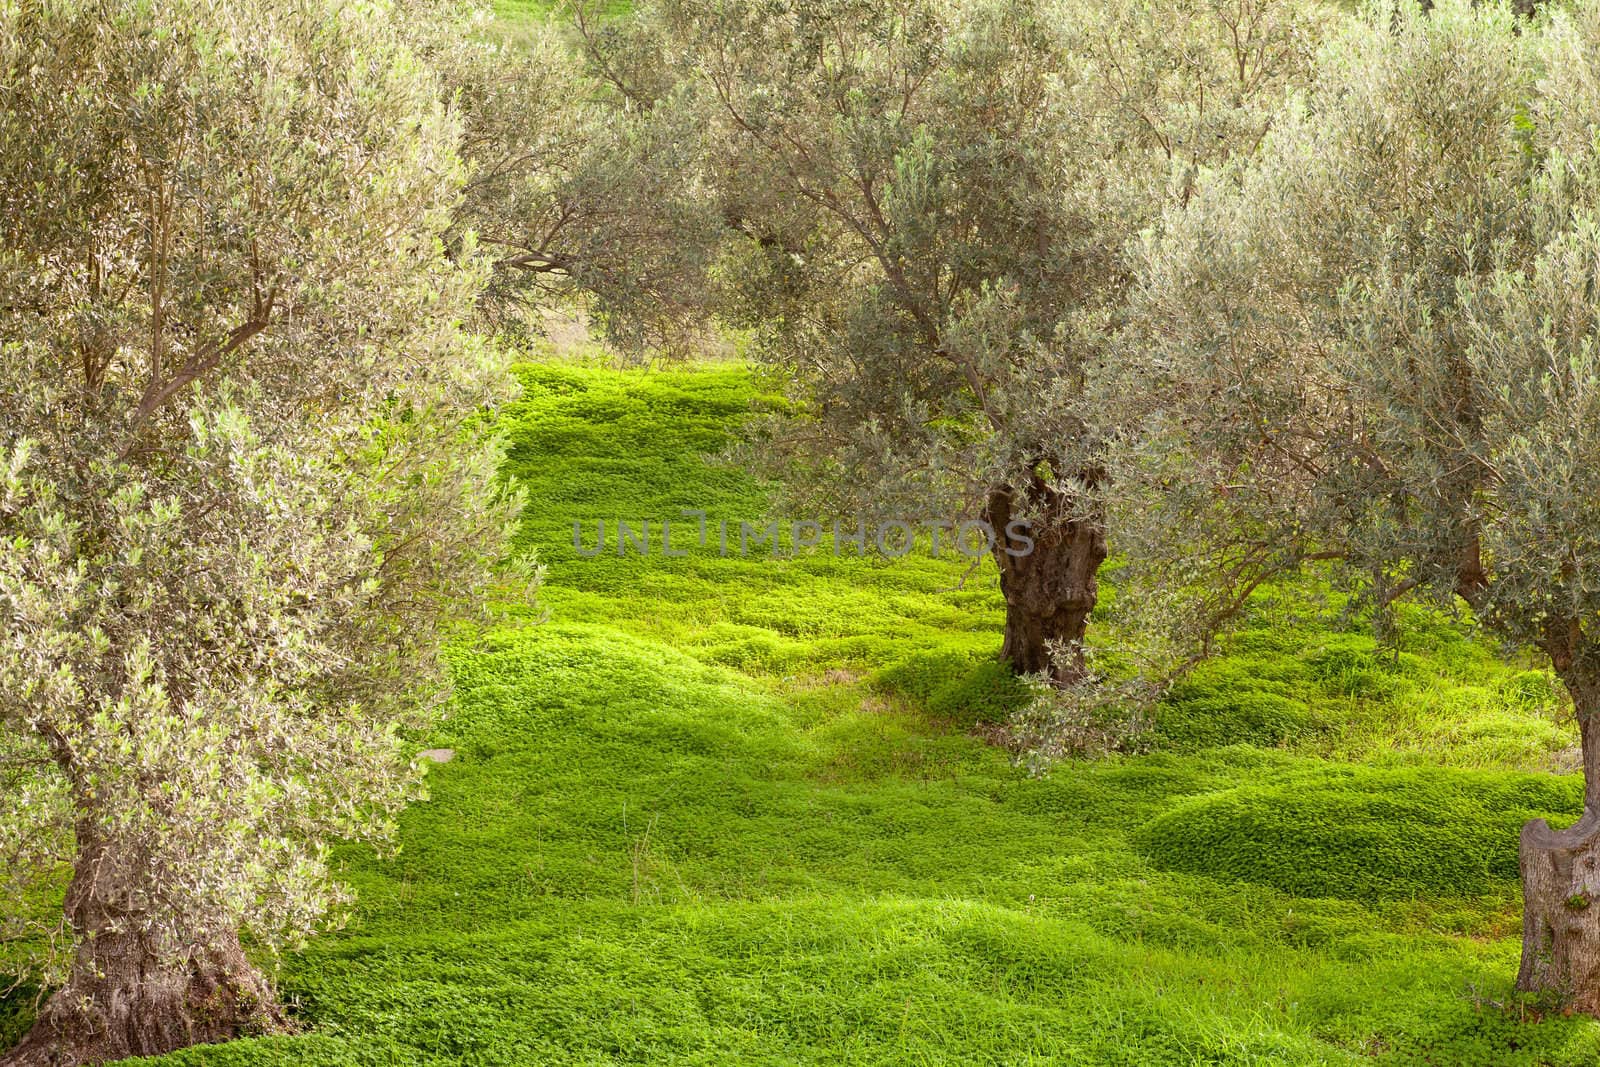 Grove of olive trees (Olea europaea) with dense cover of clover on the ground.